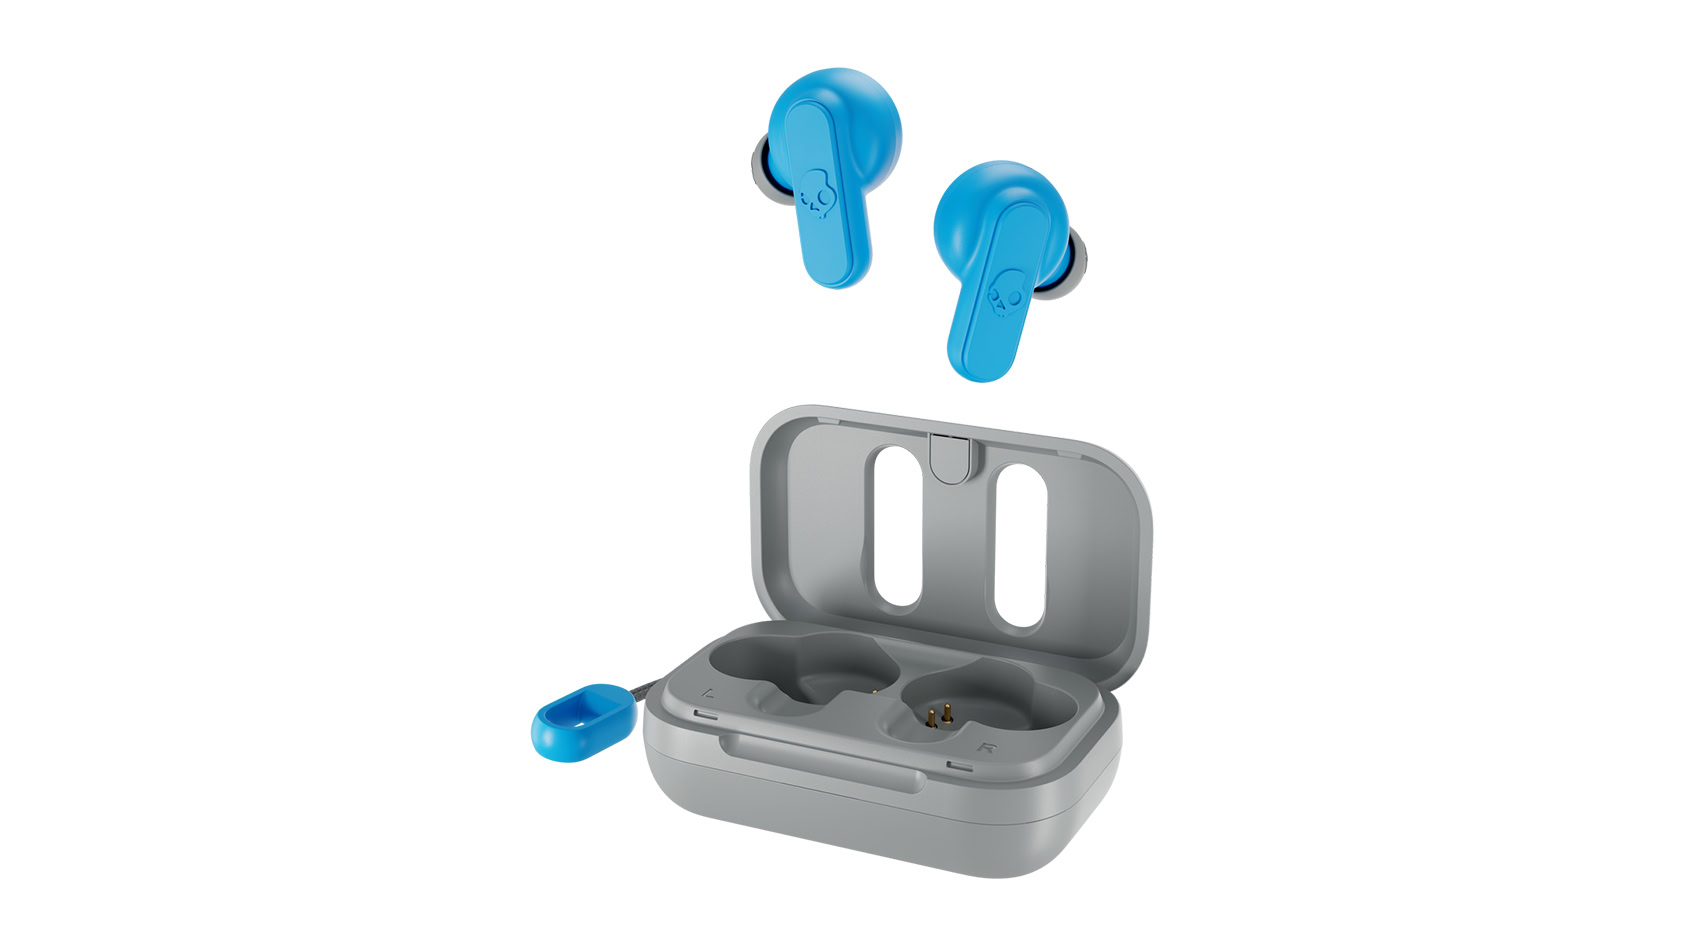 The Skullcandy Dime True Wireless Earbuds in blue above the light grey case.